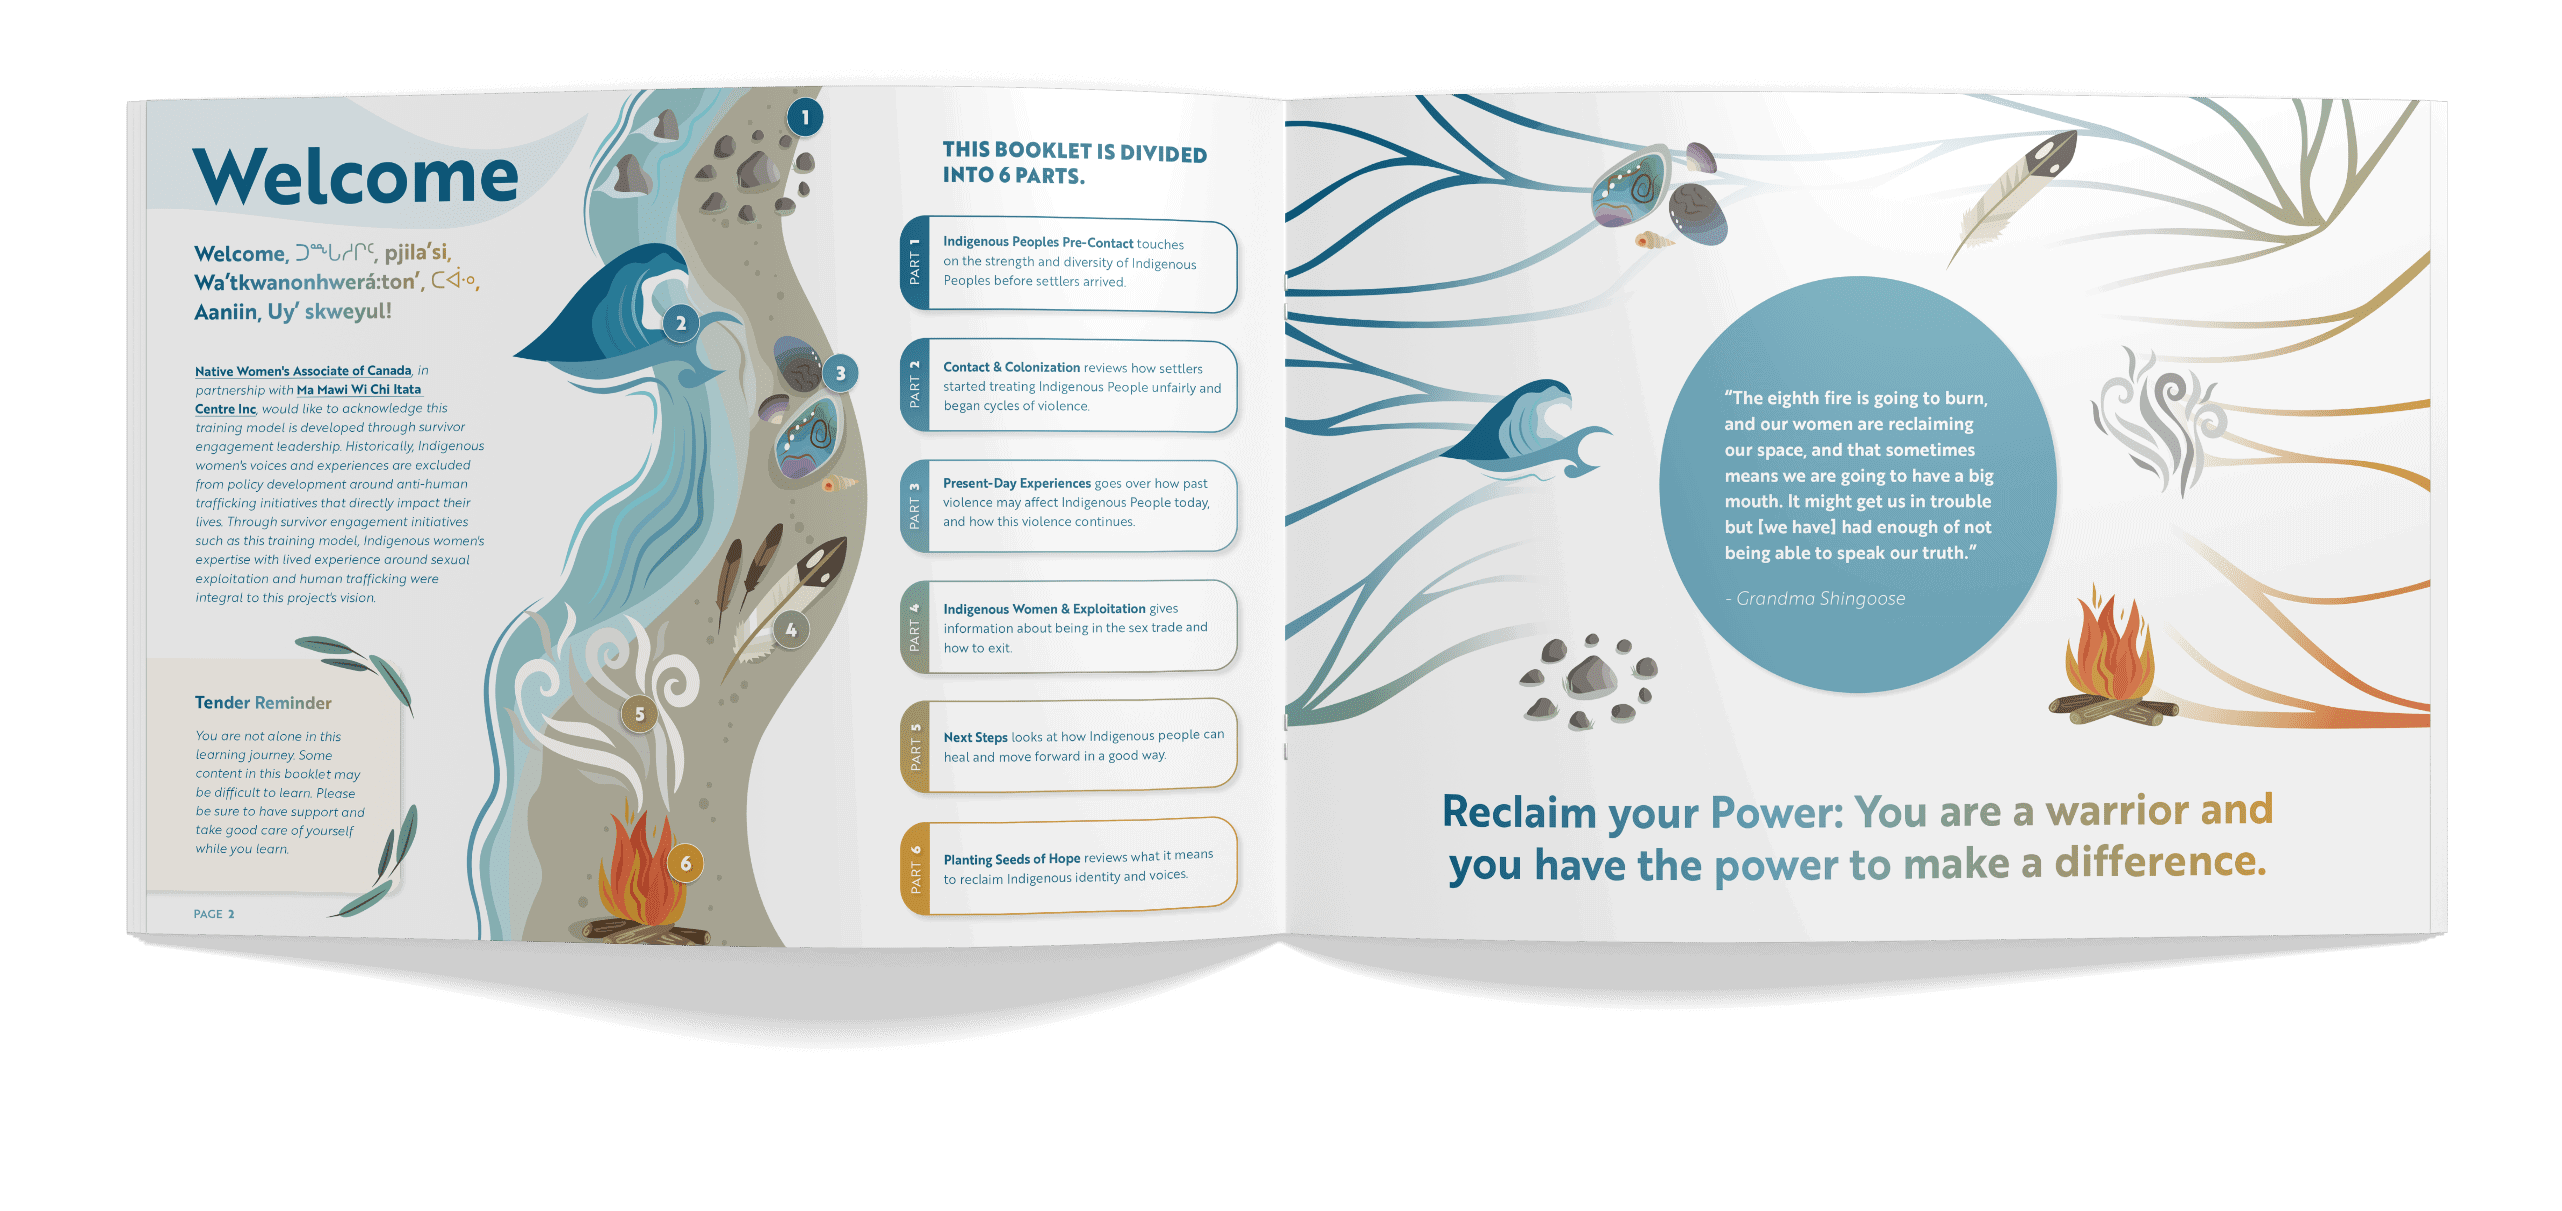 An internal spread of the Safe Passage Anti-Trafficking Toolkit booklet. The spread features an welcome page with a graphic of a river coming down the centre of the page. The spread then explains the 6 sections of the booklet.